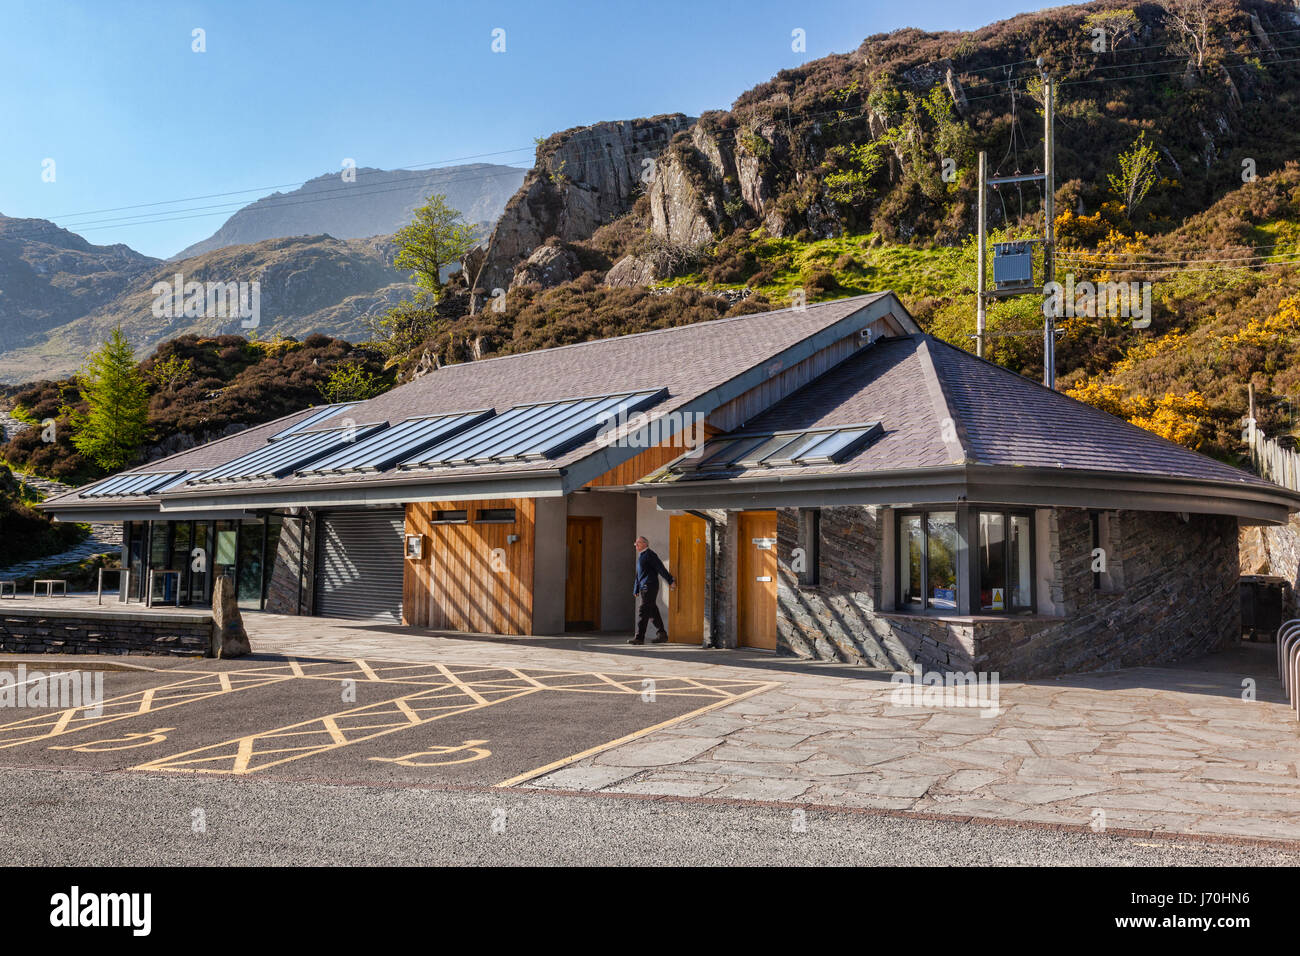 Visitor centre at Llyn Idwal, Snowdonia, North Wales, on a beautiful spring day with clear blue sky. Stock Photo